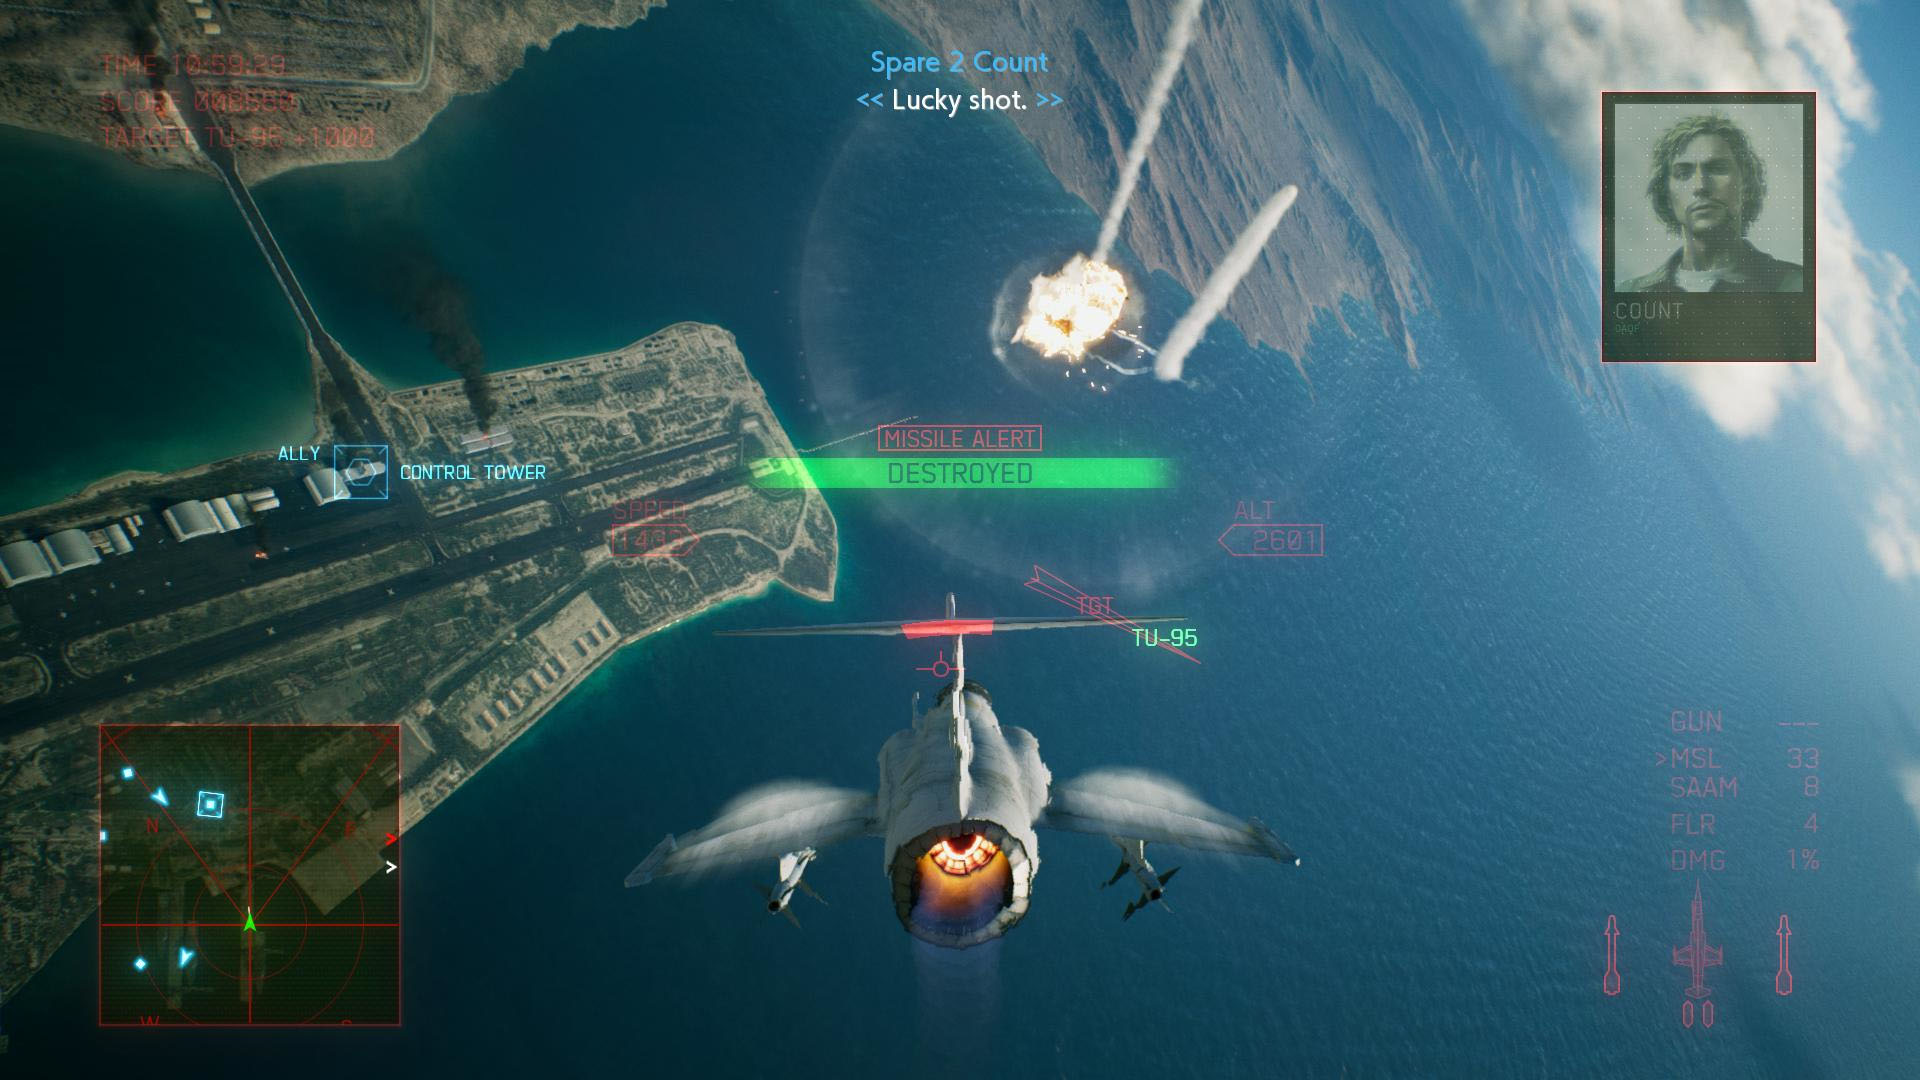 Ace Combat 7: Skies Unknown PC review – thrills marred by frustration